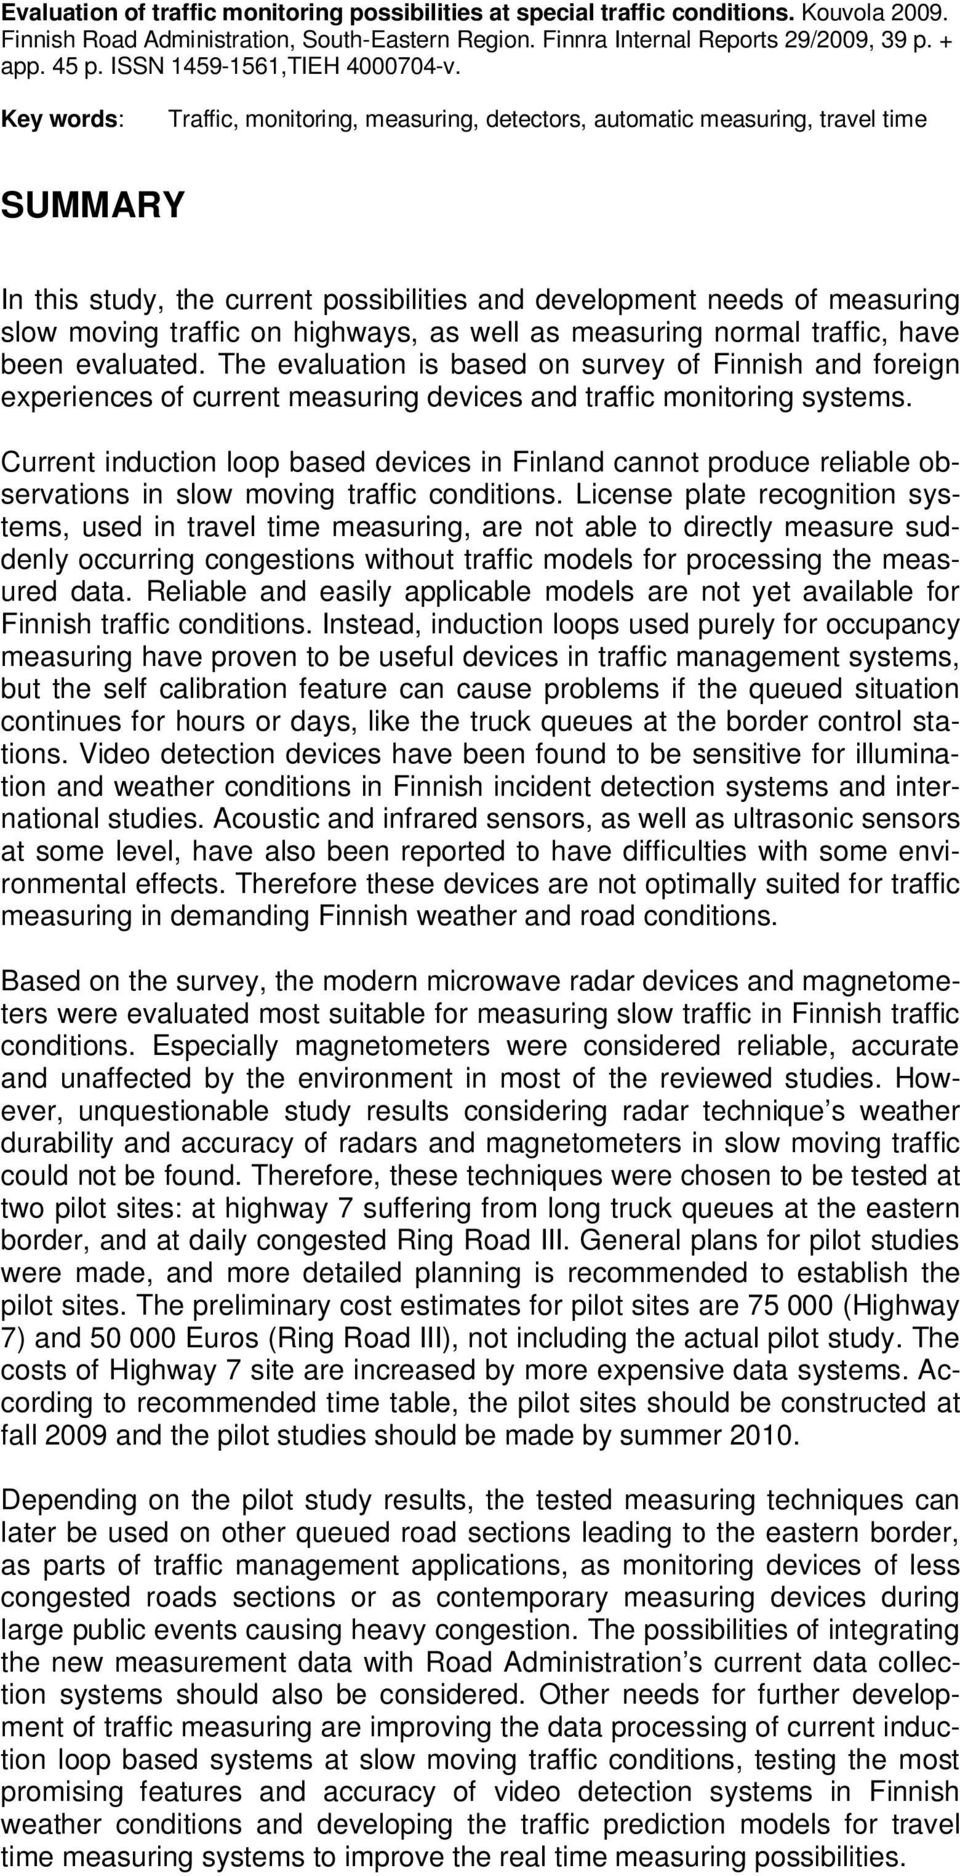 Key words: Traffic, monitoring, measuring, detectors, automatic measuring, travel time SUMMARY In this study, the current possibilities and development needs of measuring slow moving traffic on